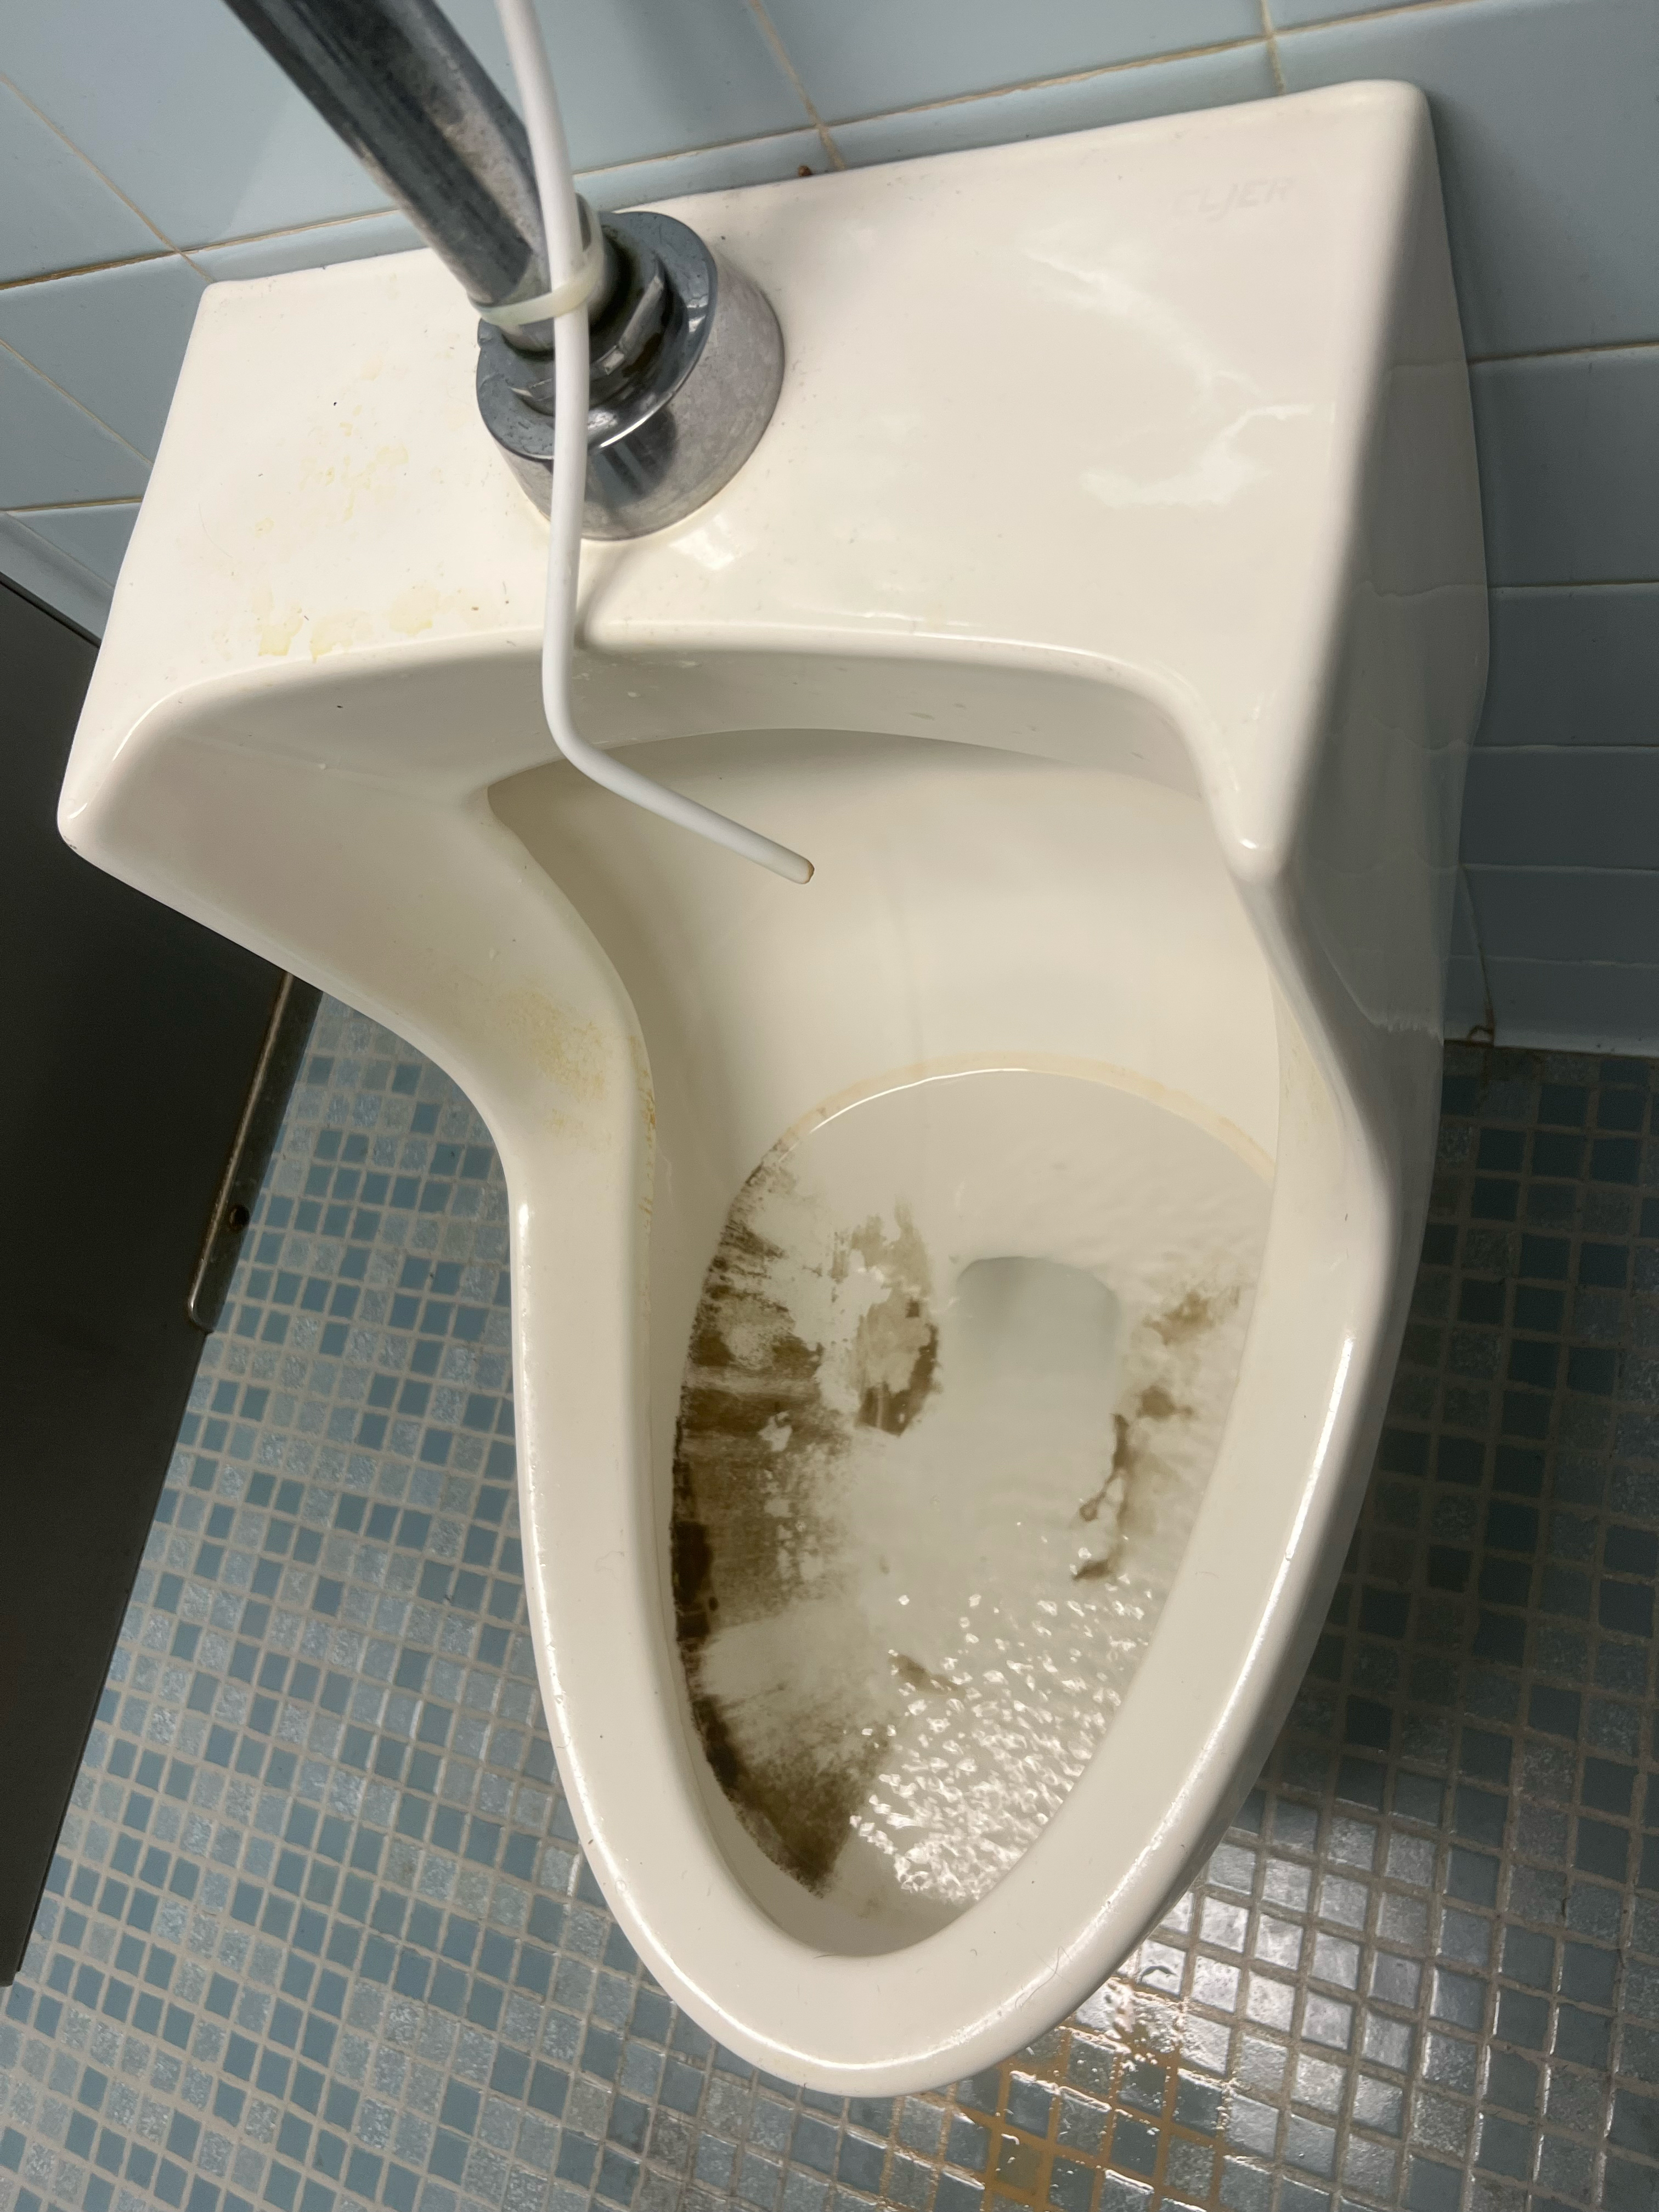 Apparent mold streaks down the side of a urinal. According to Douglas Galuszka, chief of logistics who provided the photo dated June 7, 2023, it was taken in a bathroom of Building 18 on the Veterans Affairs Puget Sound Health Care System campus. (Courtesy of Douglas Galuszka)